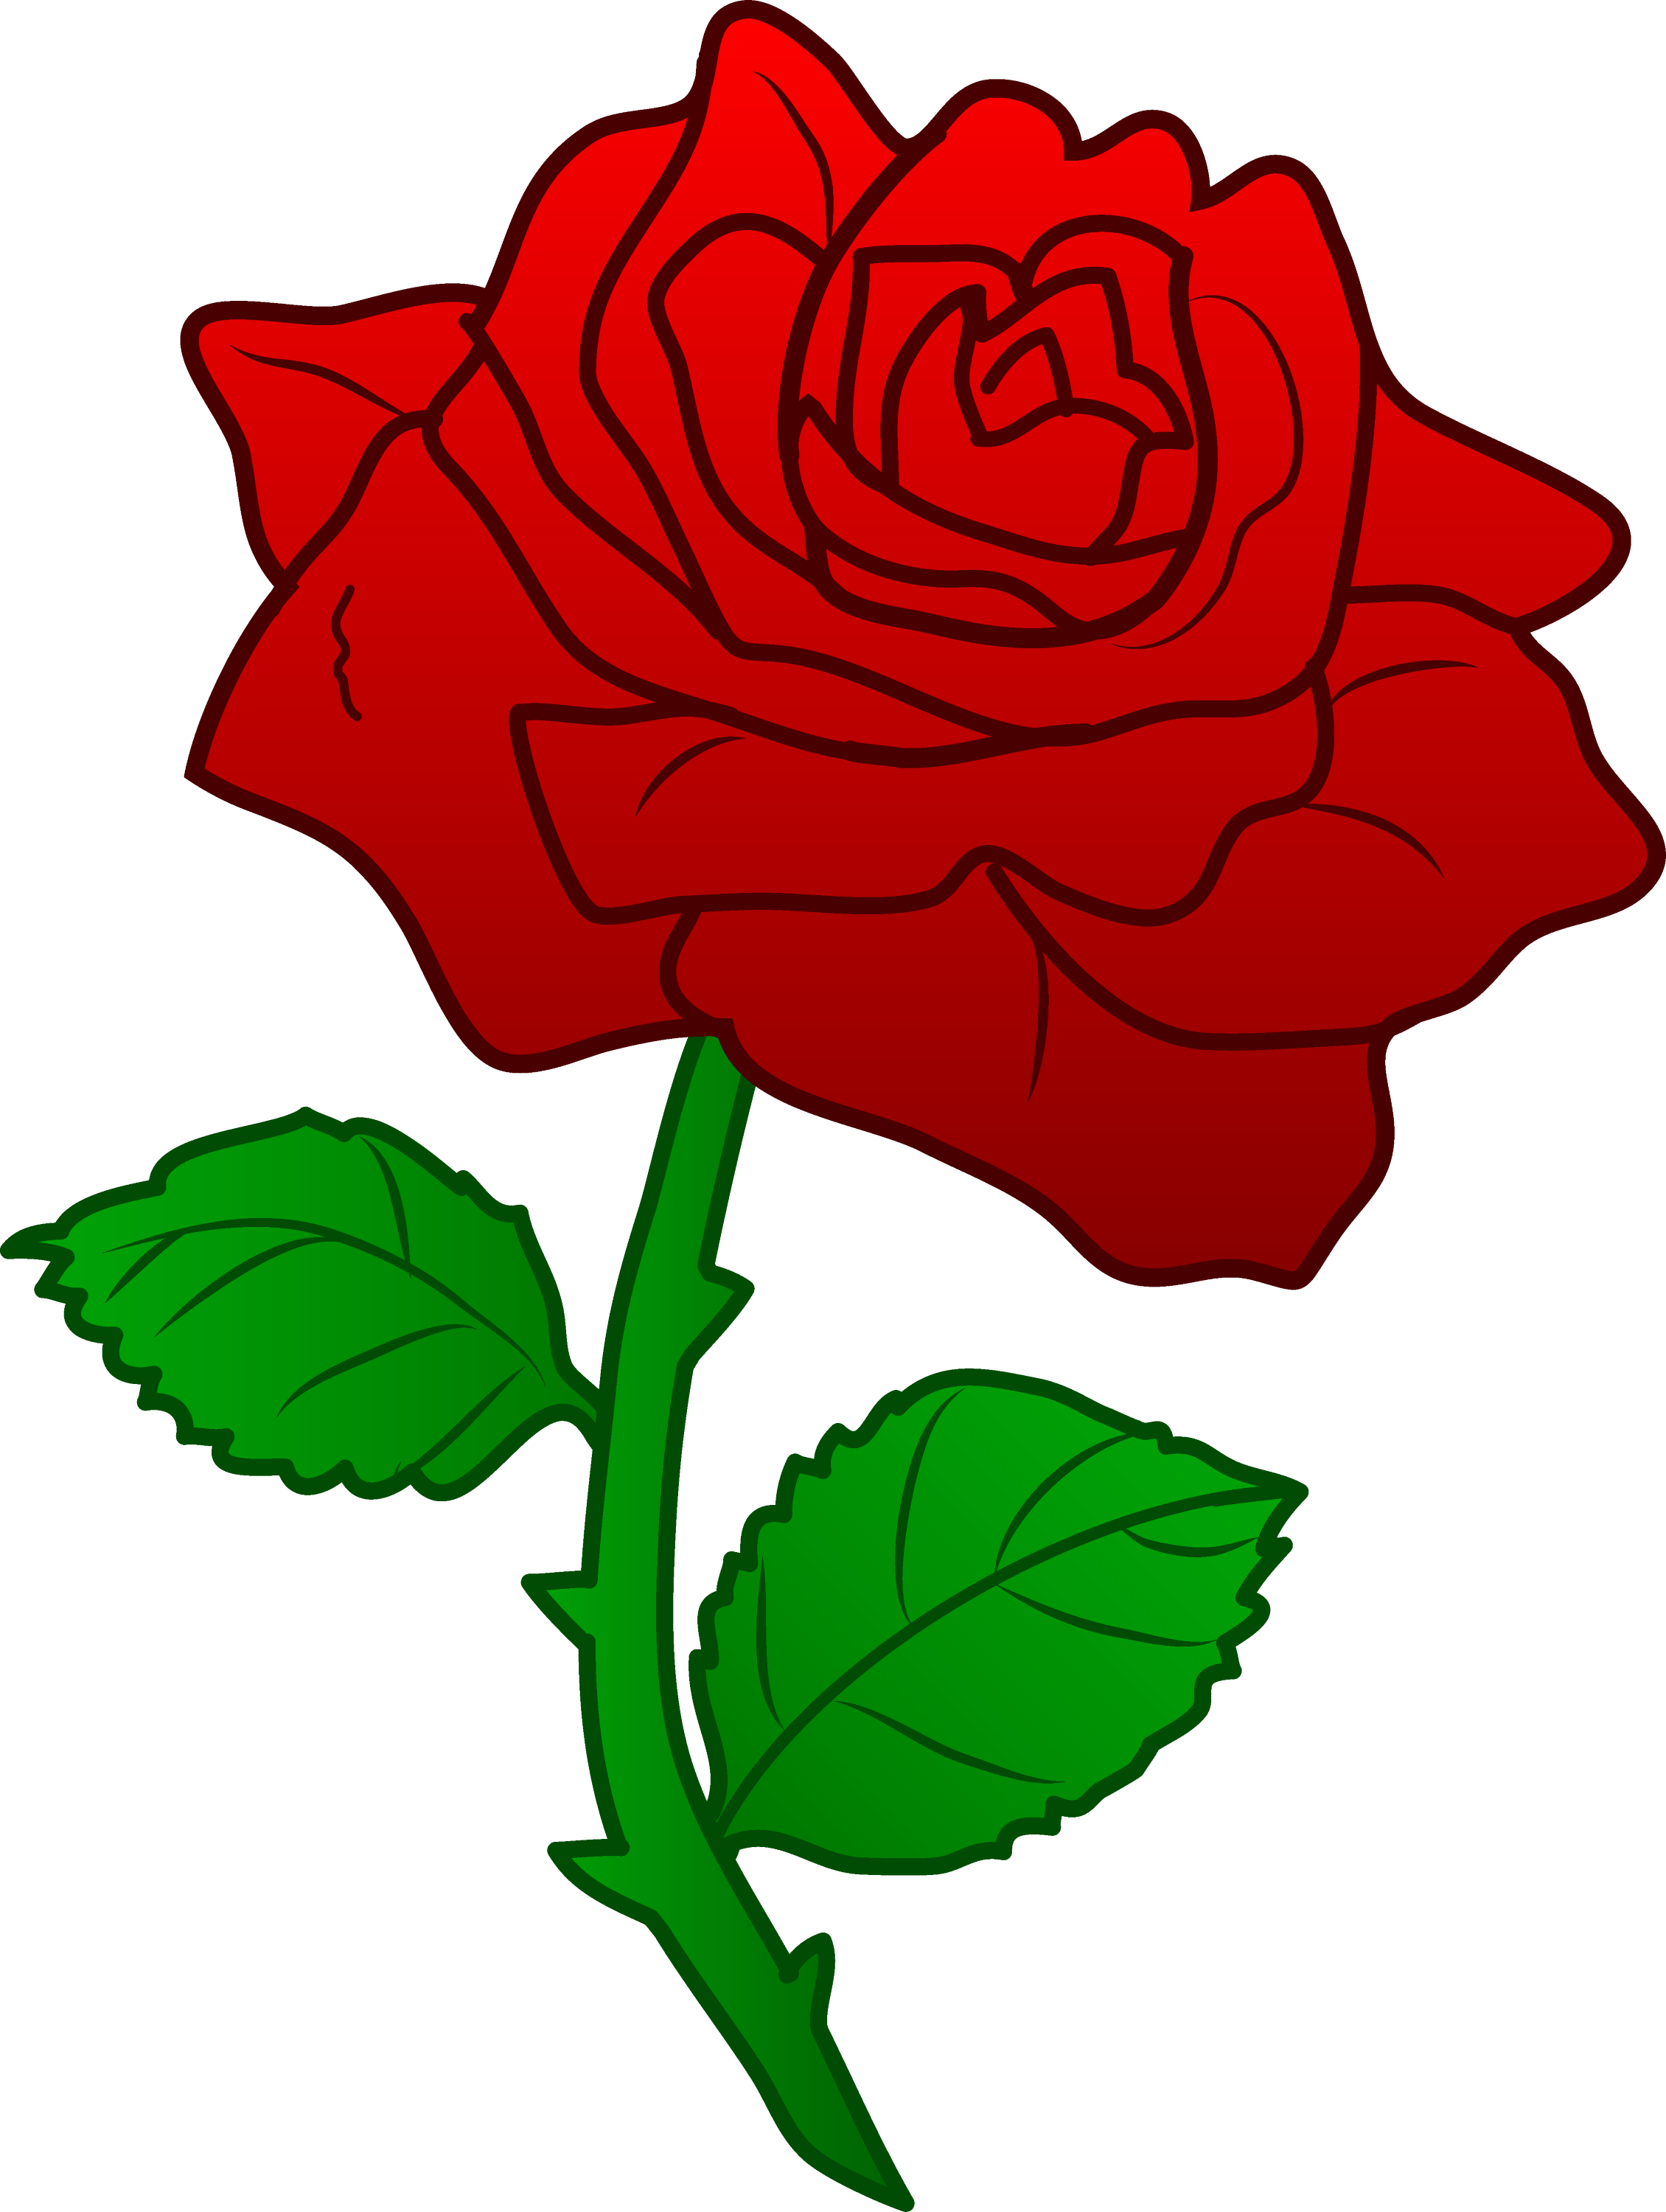 red roses clipart - photo #21